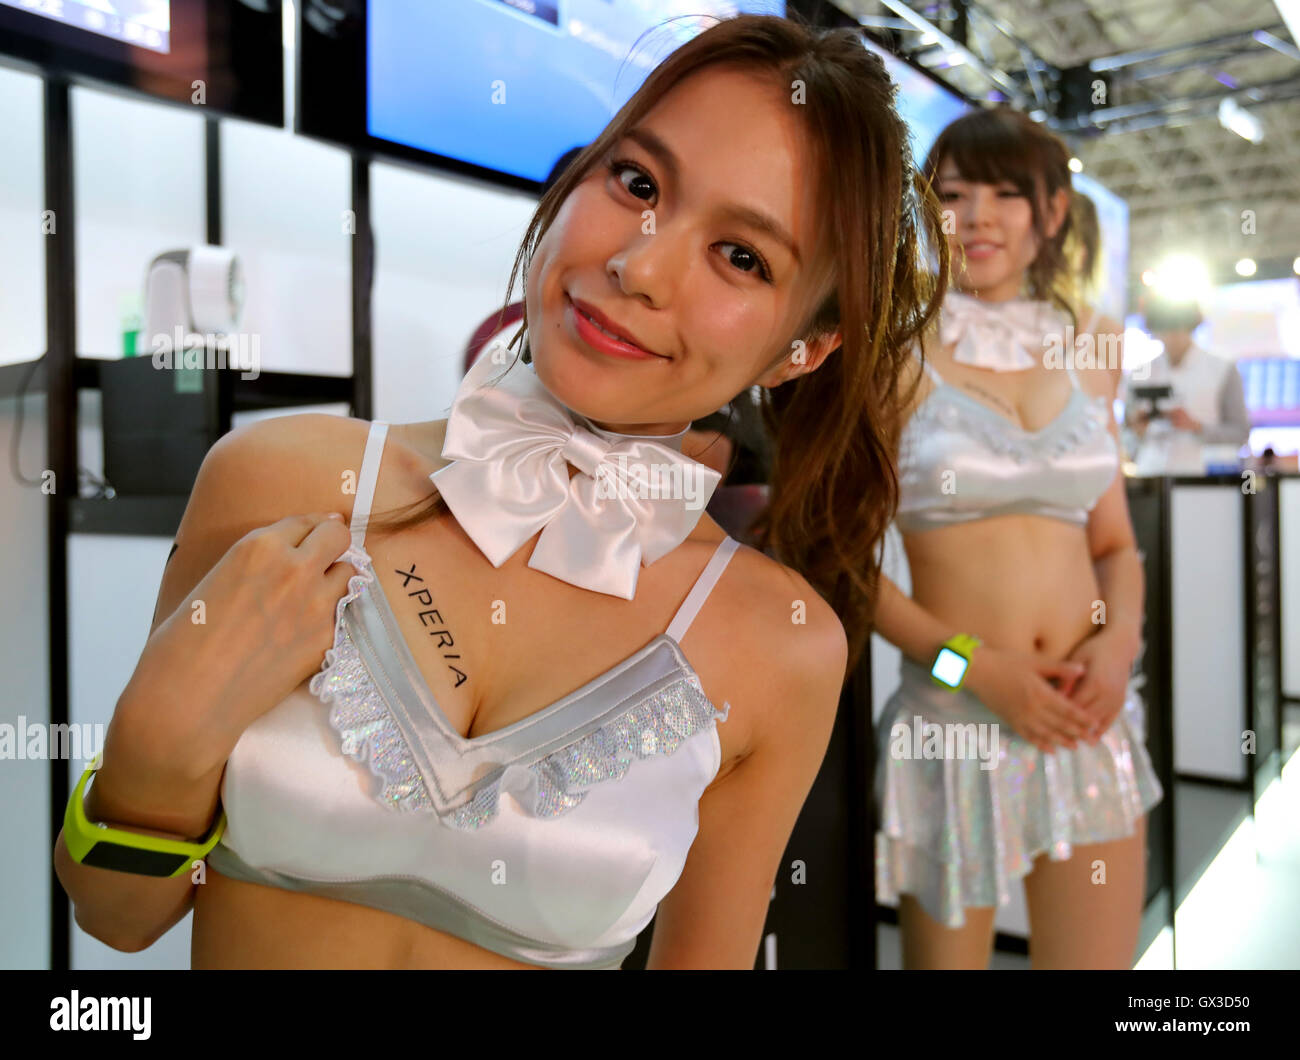 Thursday. 15th Sep, 2016. A model puts a sticker of Sony's Xperia smartphone on her body for the promotion at the annual Tokyo Game Show in Chiba, suburban Tokyo on Thursday, September 15, 2016. The 20th anniversary Show includes show a new Virtual Reality (VR) area. The event hosts 614 exhibitors from 37 different countries and runs from September 15 to 18 at the International Convention Complex Makuhari Messe in Chiba. 1,523 game titles for smartphones, games consoles, PC and VR platforms are on show. Credit:  Yoshio Tsunoda/AFLO/Alamy Live News Stock Photo